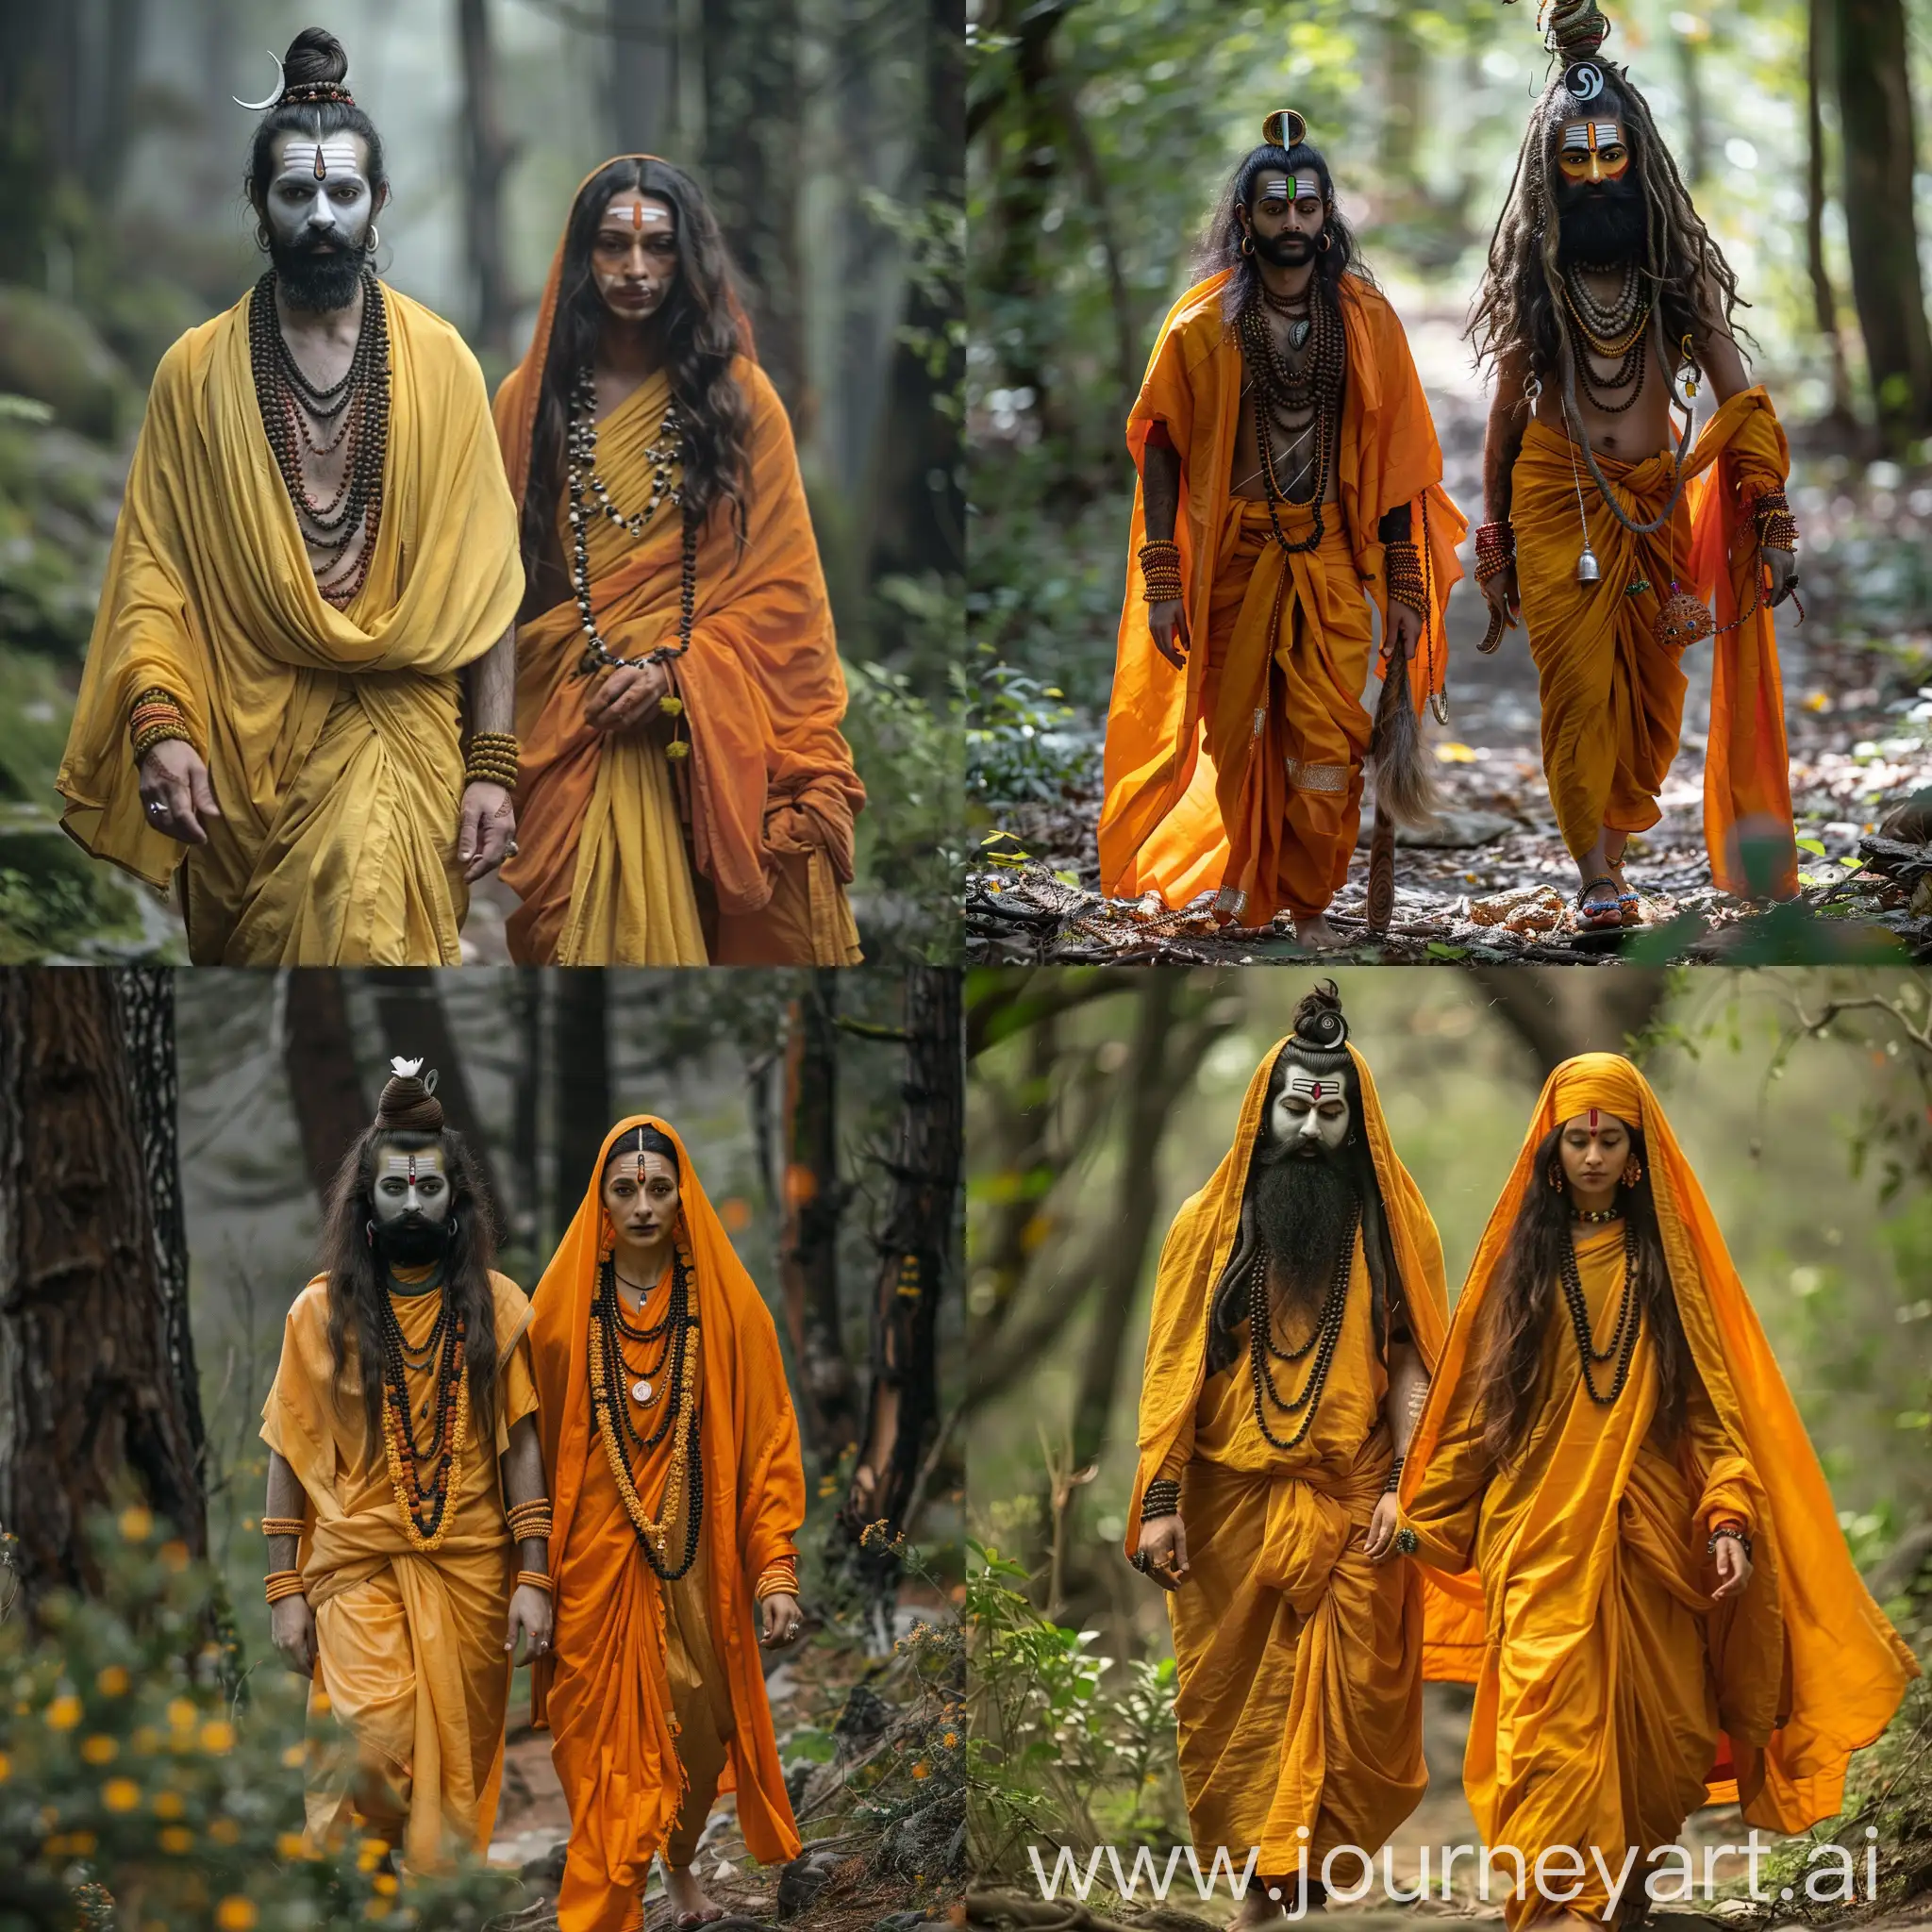 Lord Shiva snd parvati dressed like monks with zaffron clothes. They walk in the forest